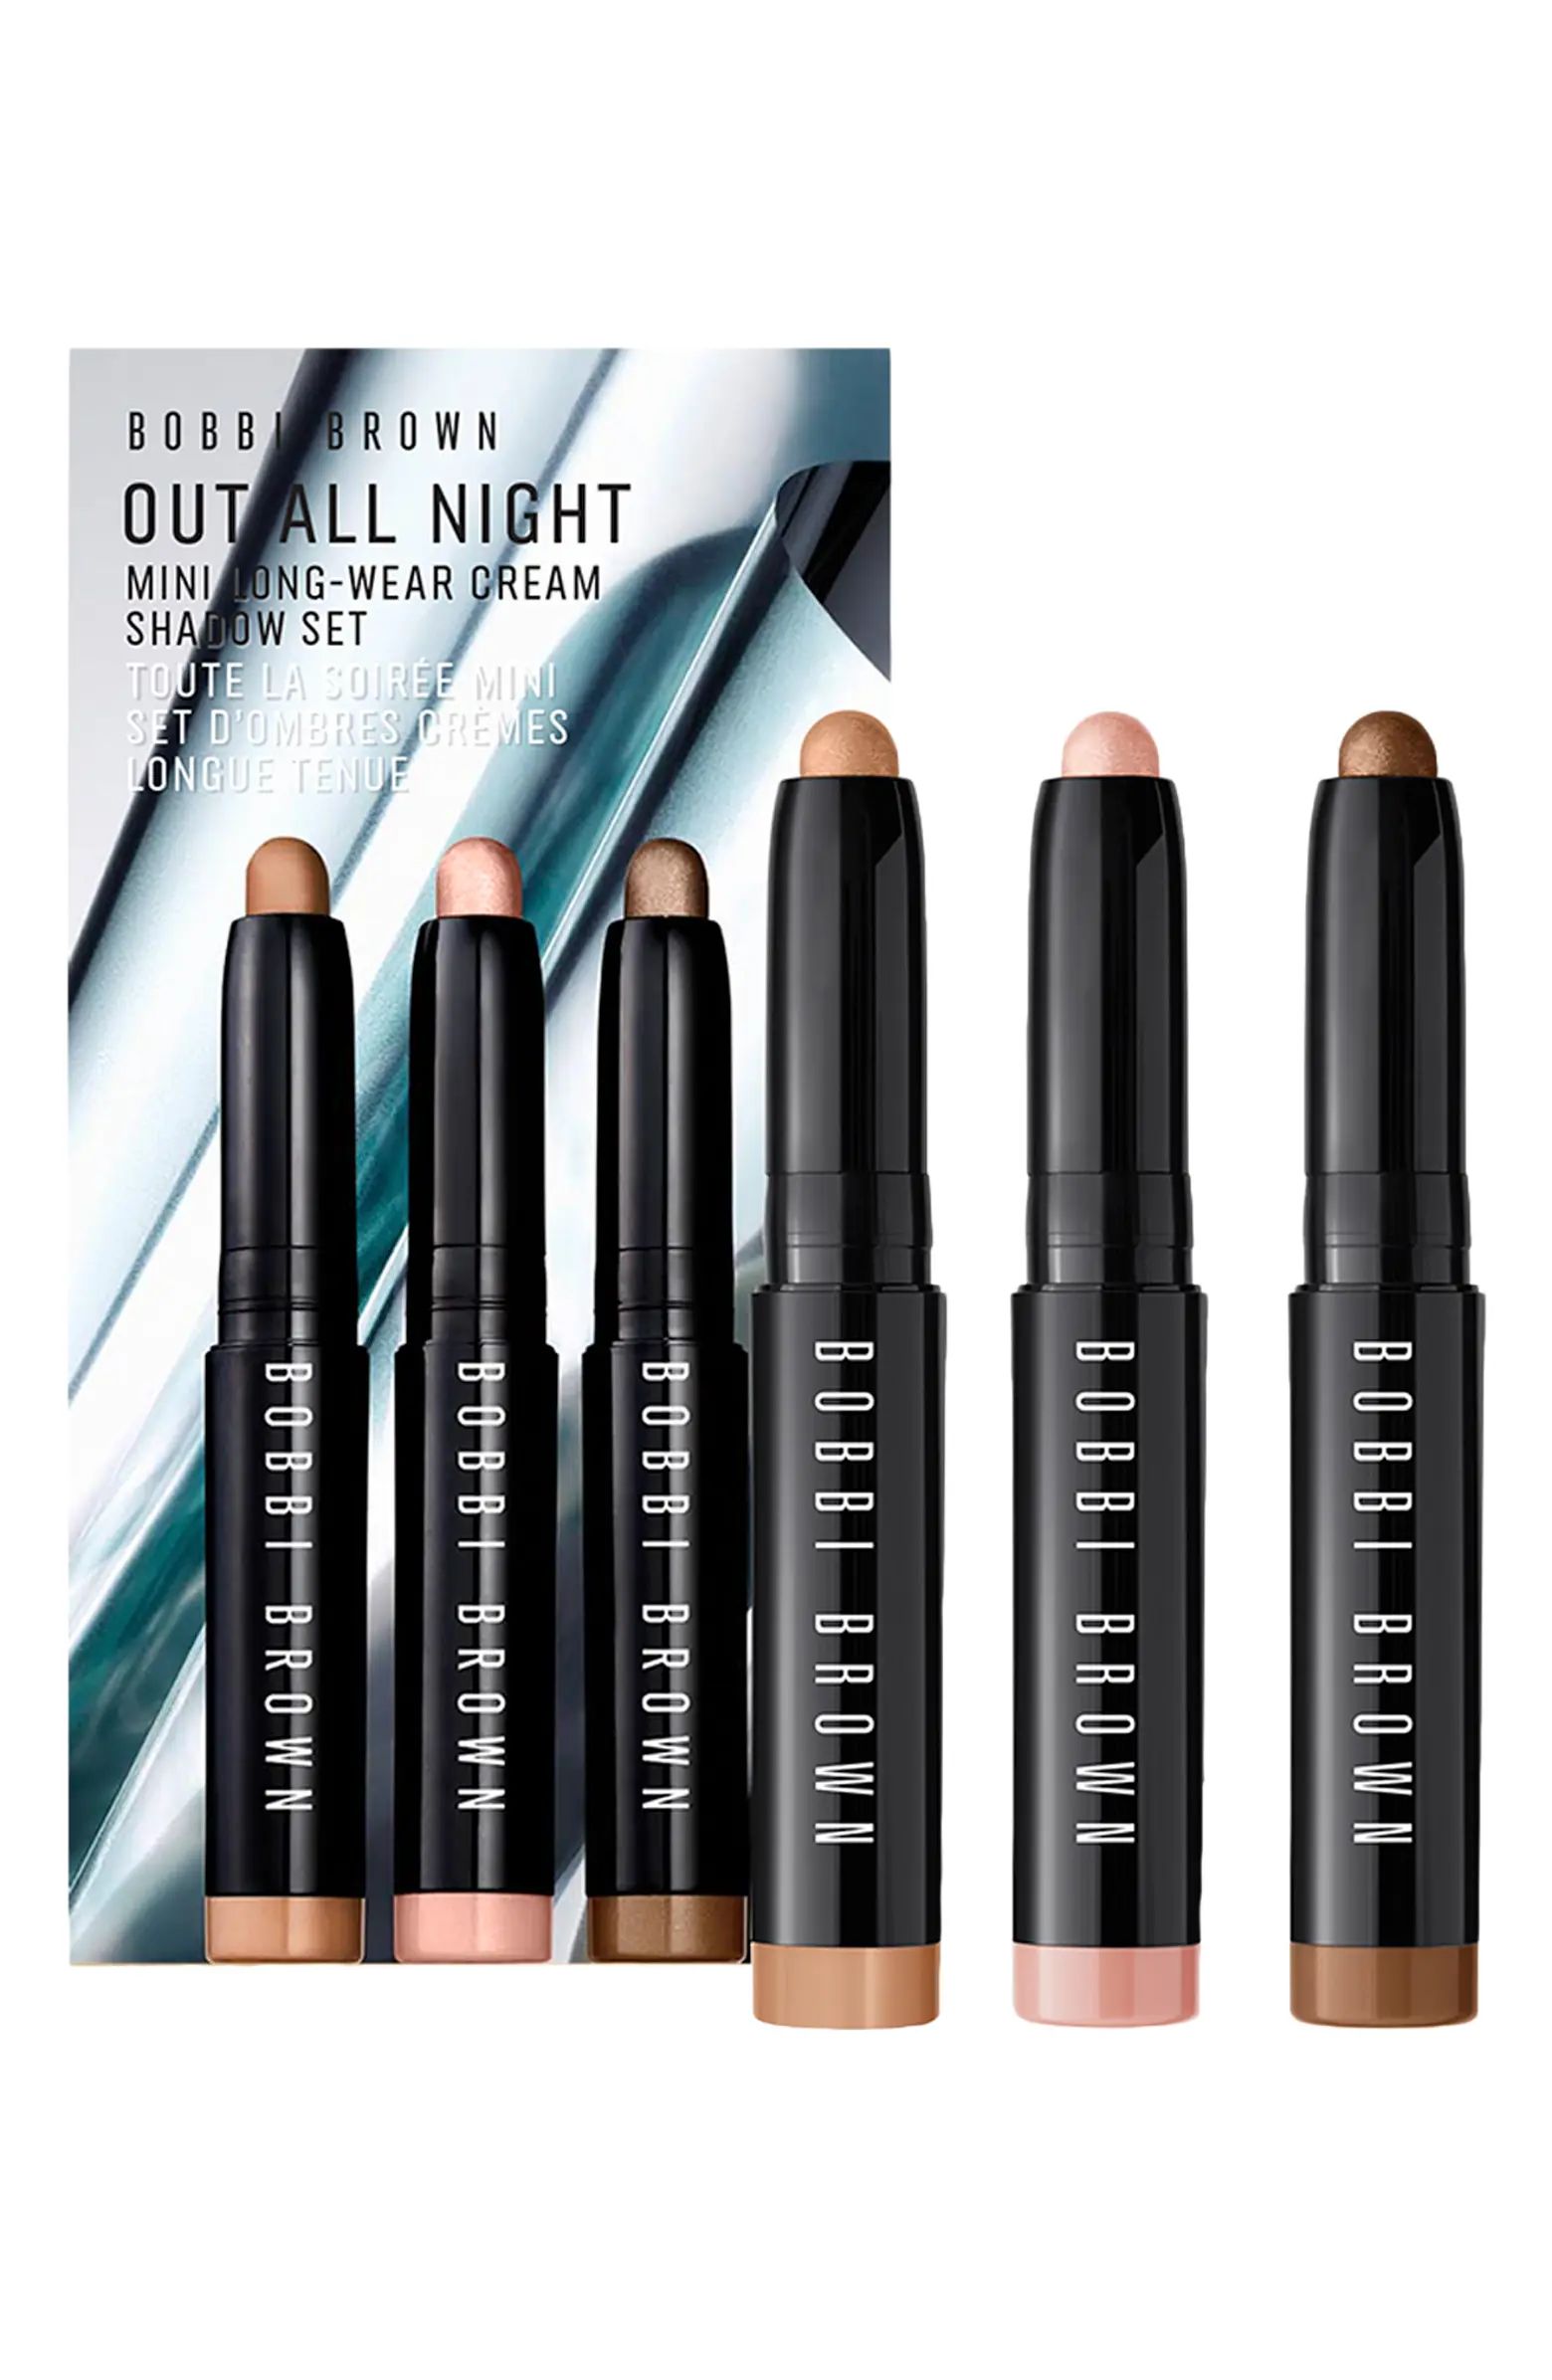 Out All Night Mini Long-Wear Cream Shadow Set USD $50 Value | Nordstrom Rack